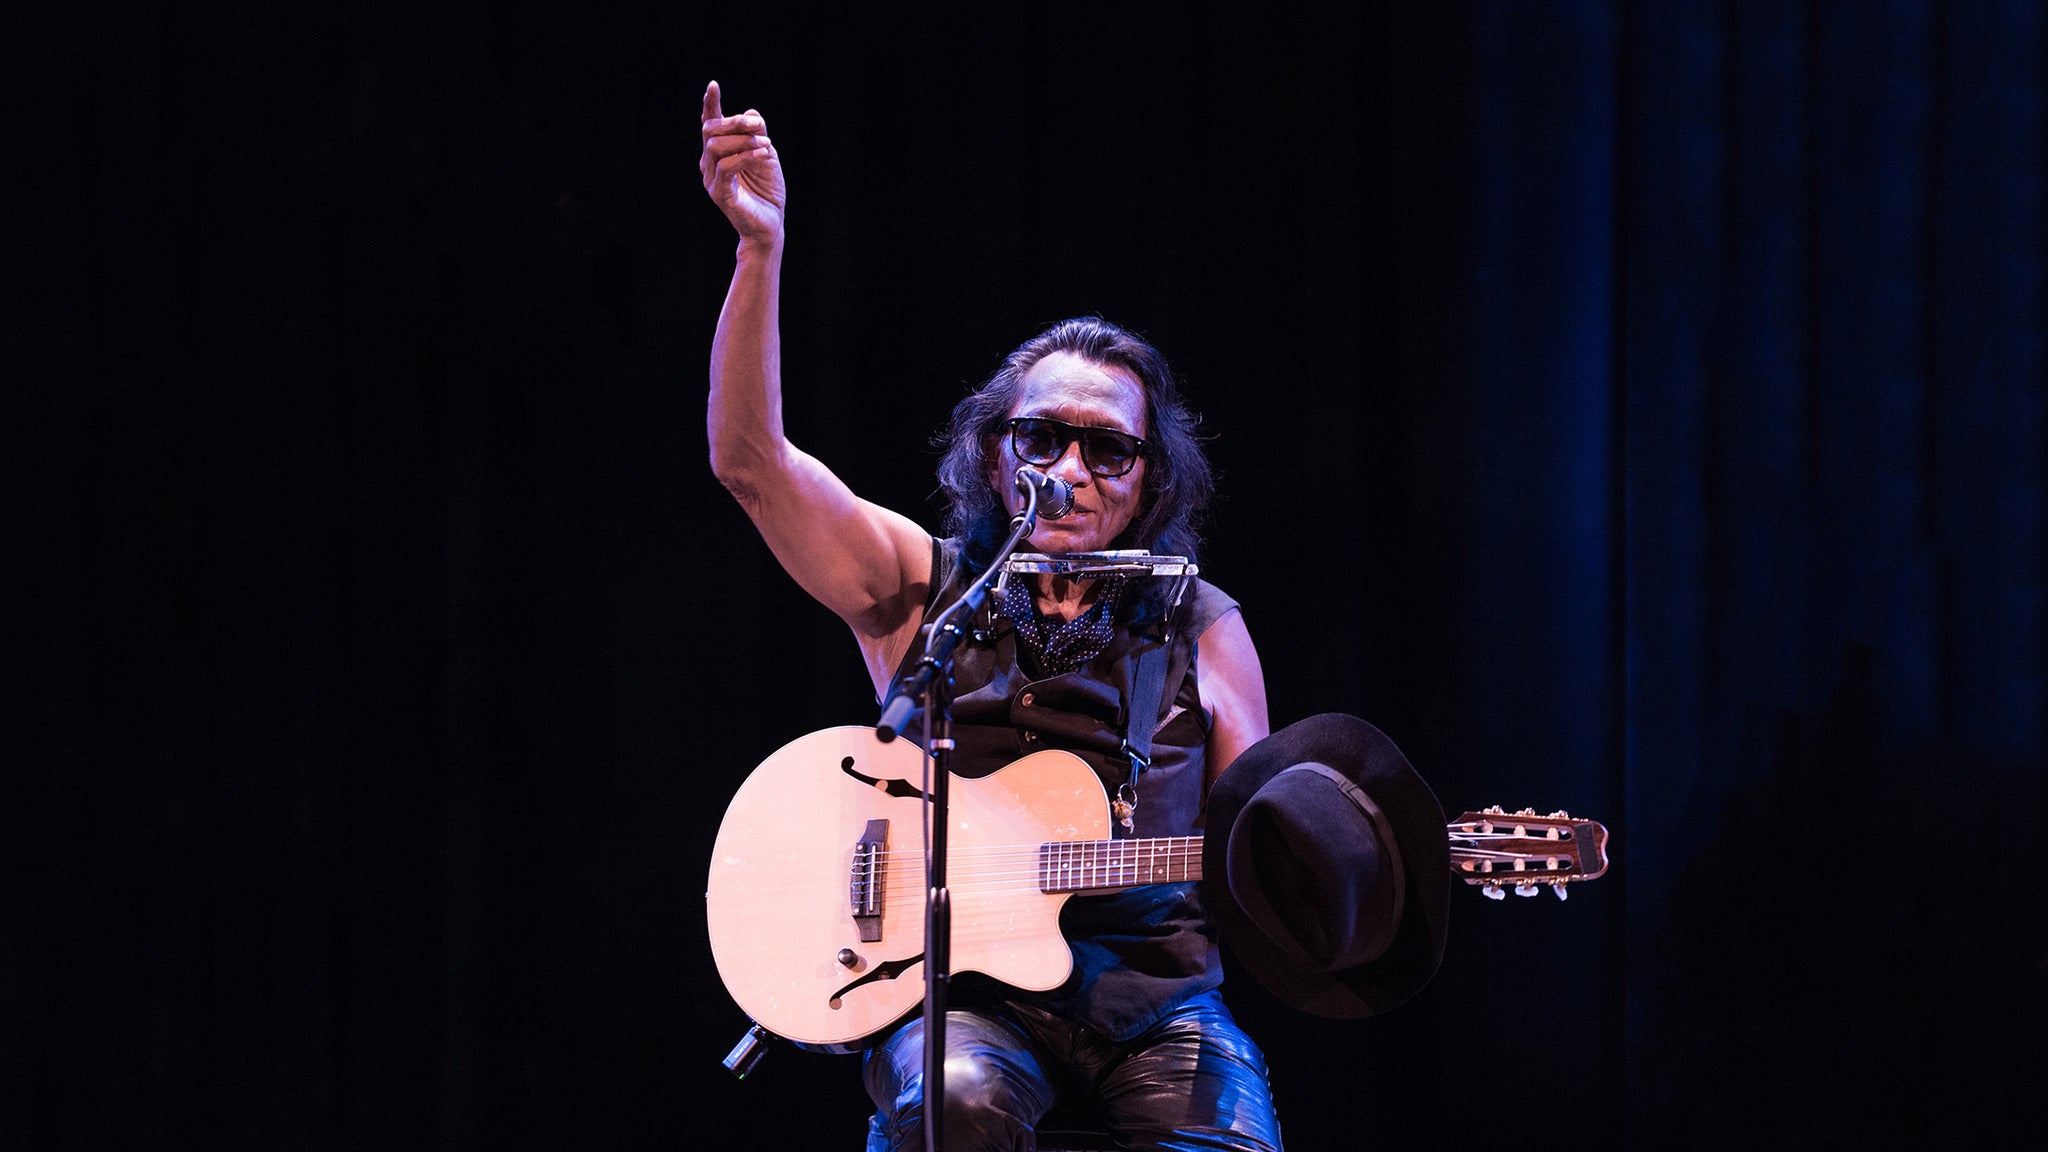 Rodriguez in Vancouver promo photo for Live Nation Mobile App presale offer code